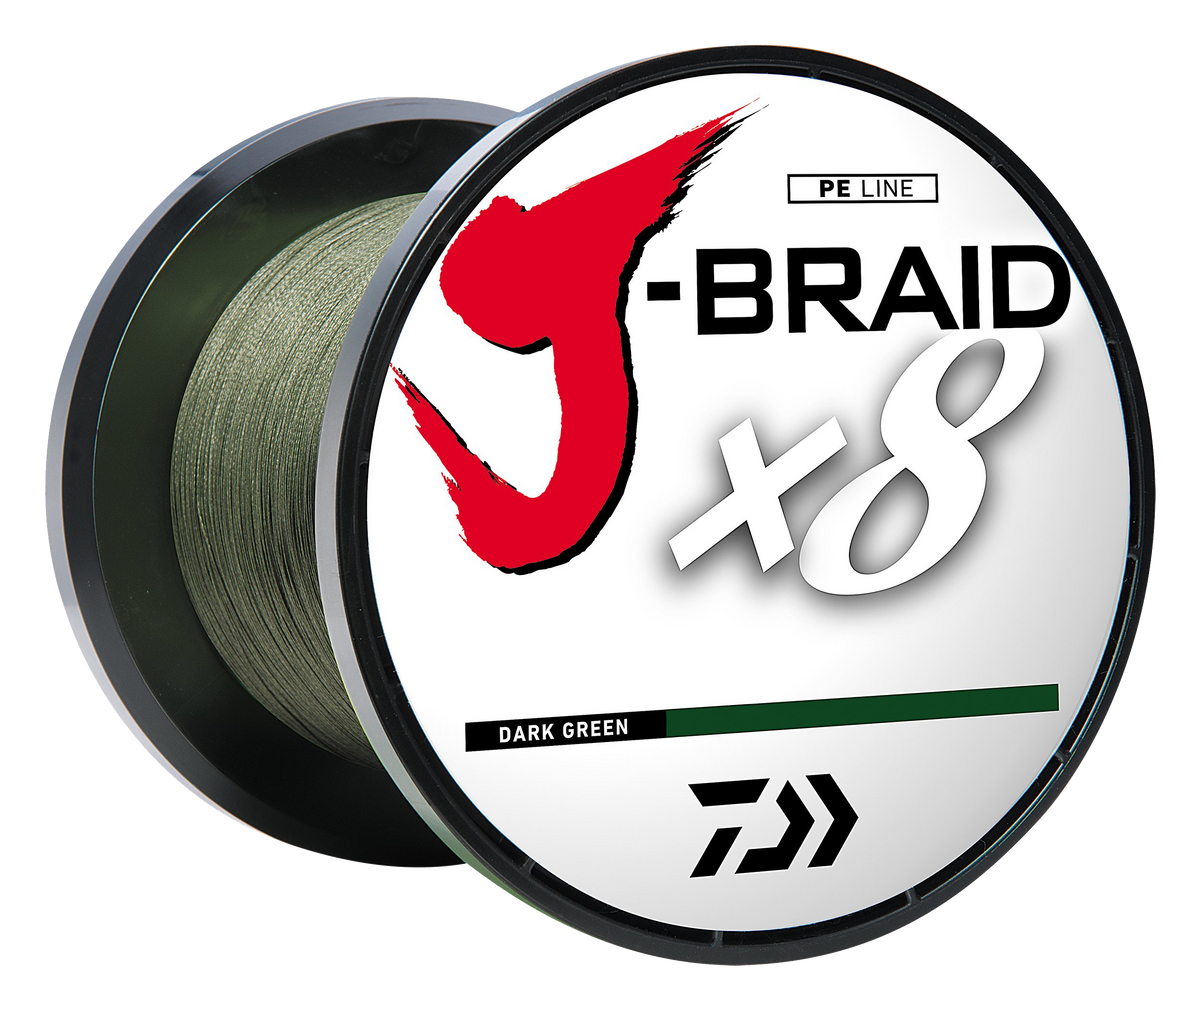 Goture X8 Braided Fishing Line - Ultra Thin Strong Sensitive Smooth and  Zero Stretch Fishing Line, Super Abrasion Resistant Tournament Braided Lines  - Blue, Black, Dark Green, Army Green- 20-80LB : 